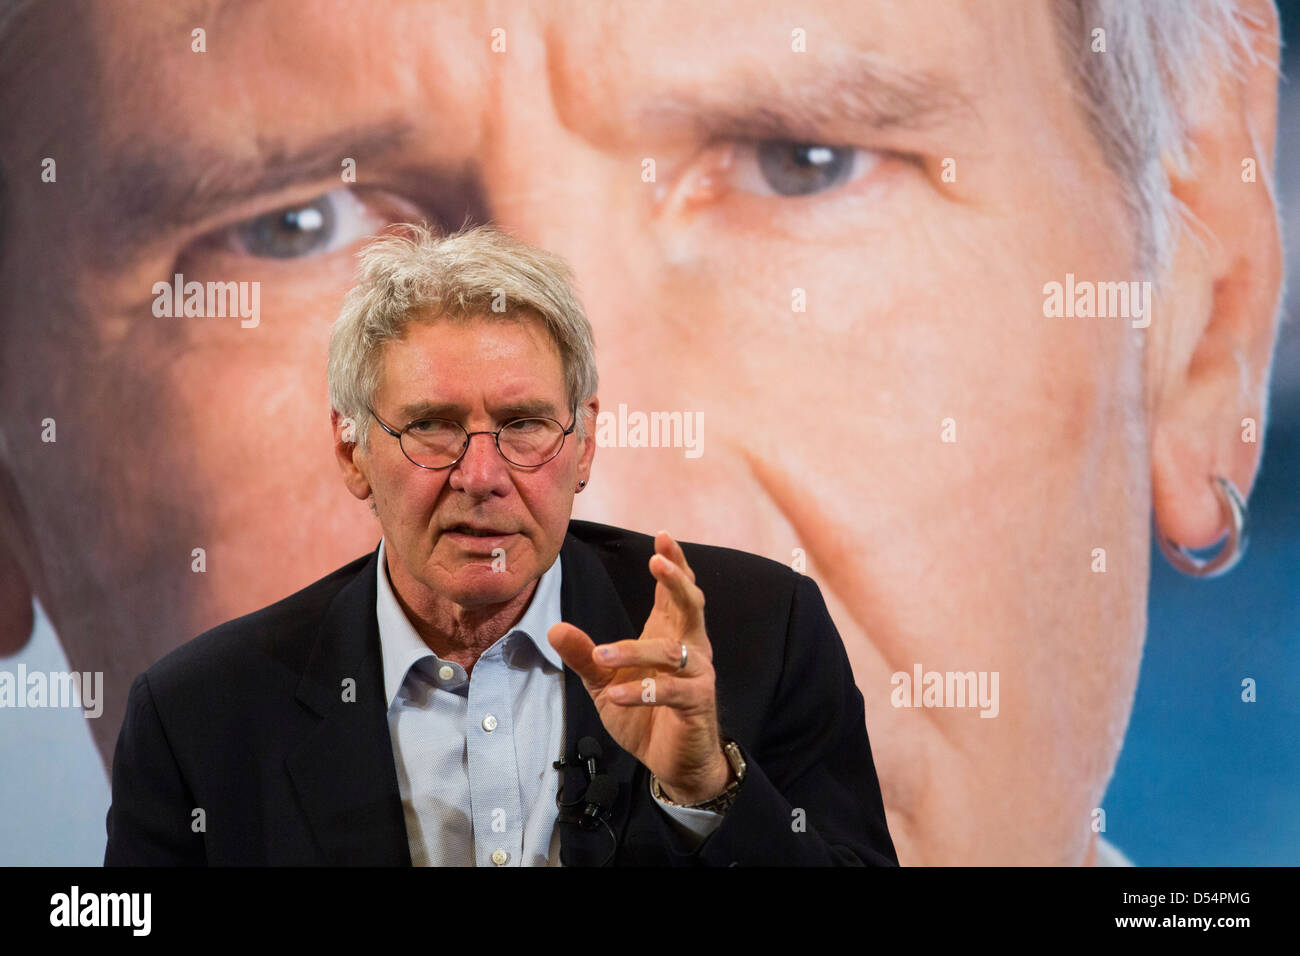 Actor Harrison Ford speaks during a civilian pilots event on Capitol Hill in Washington, DC. Stock Photo